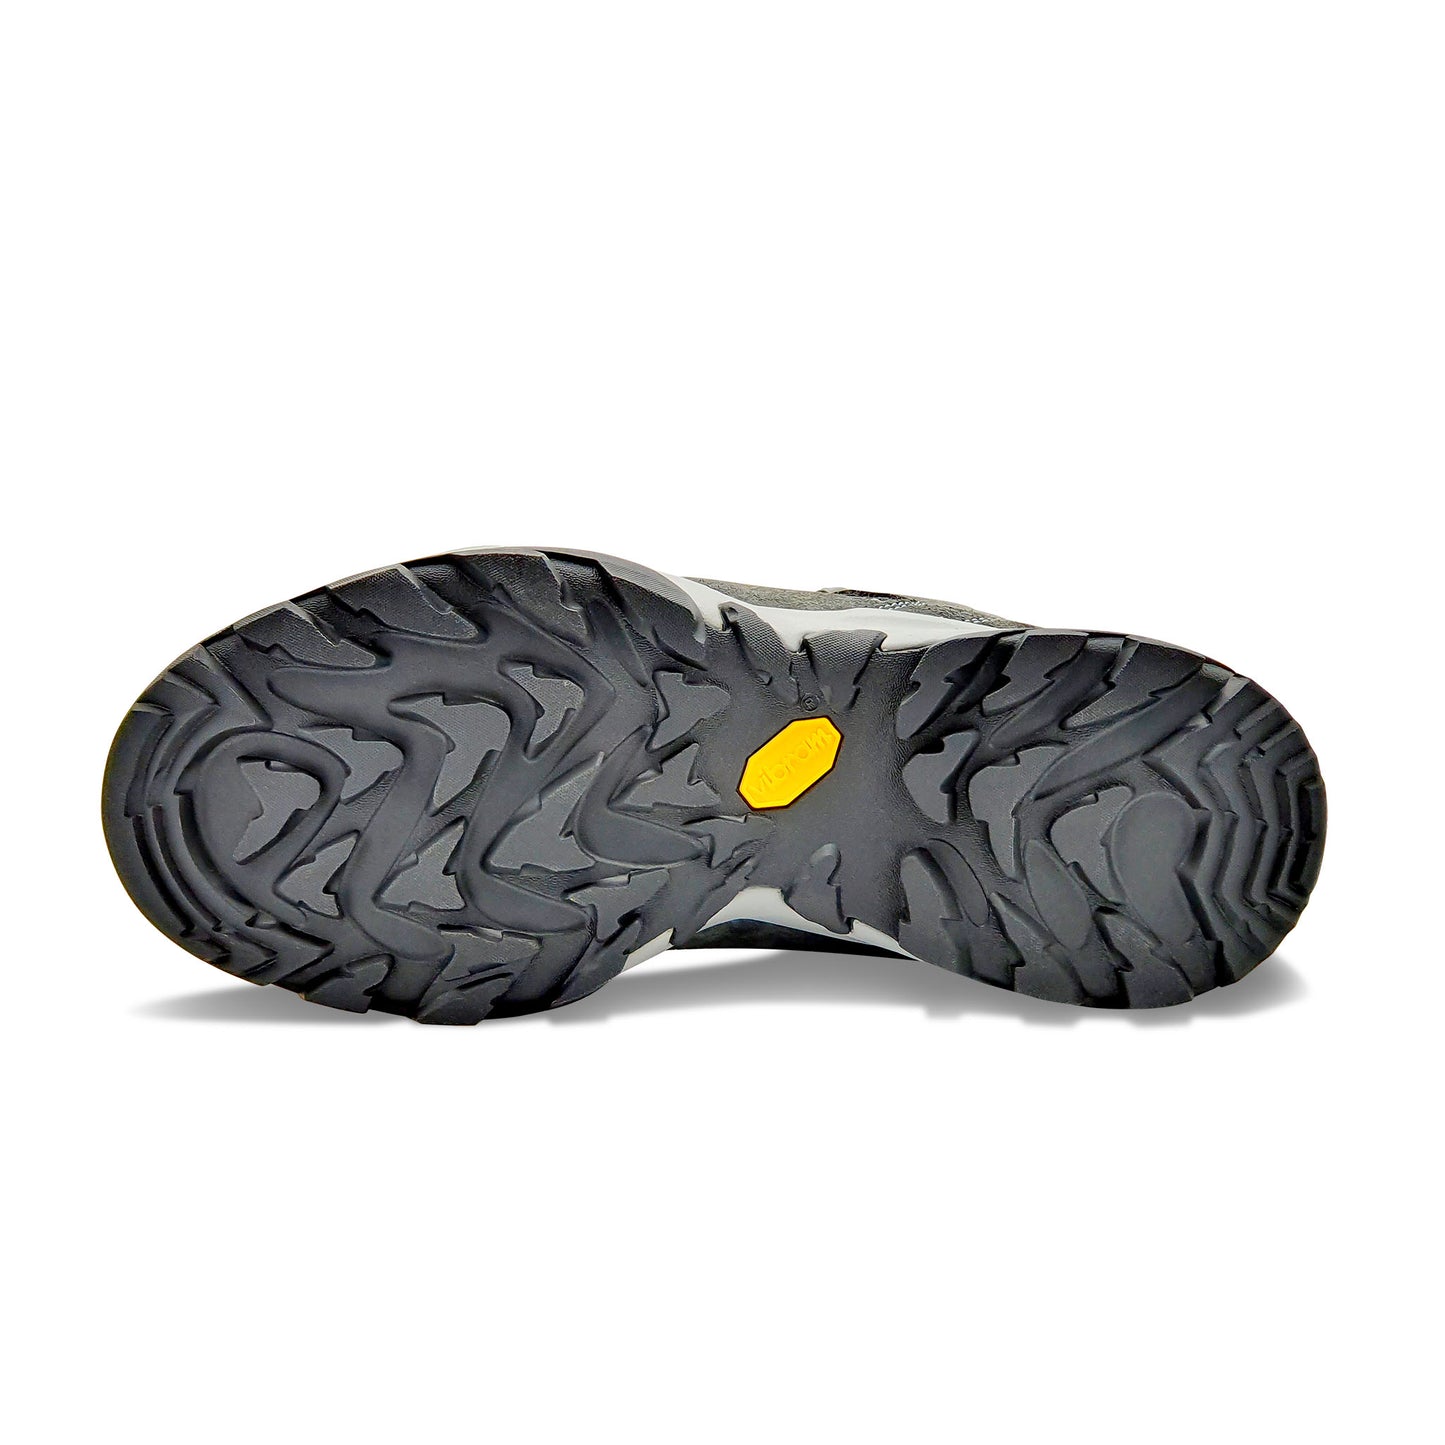 NEW ANATOM Q2 Trail Wide-Fit Light Hiking Boots with Vibram outsole.